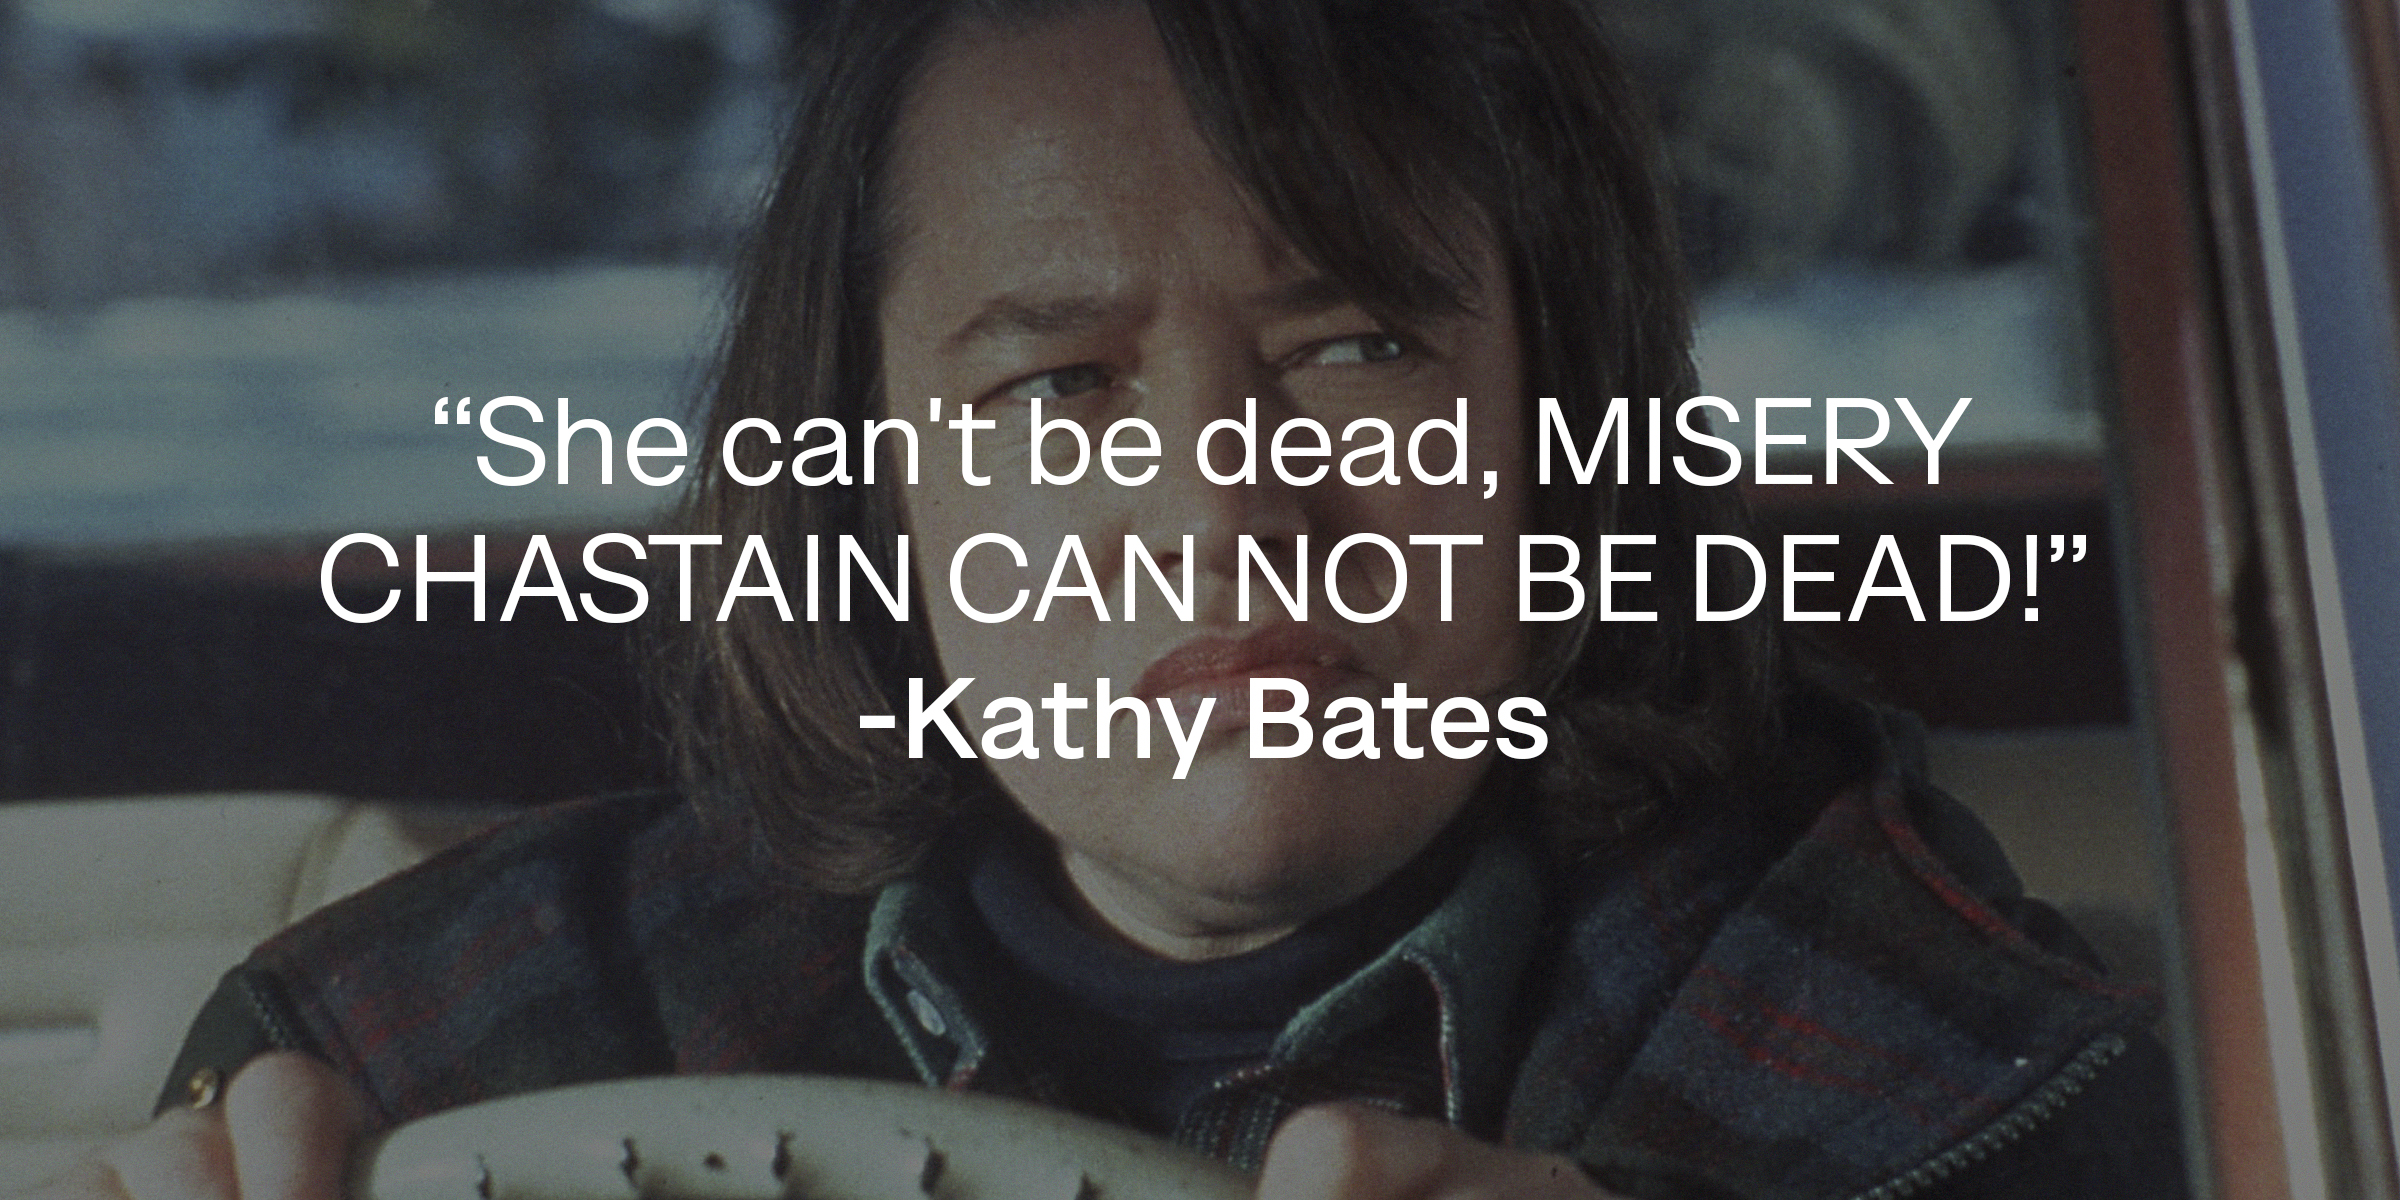 A photo of Kathy Bates with Kathy Bates' quote: “She can't be dead, MISERY CHASTAIN CAN NOT BE DEAD!” | Source: facebook.com/MiseryMovie